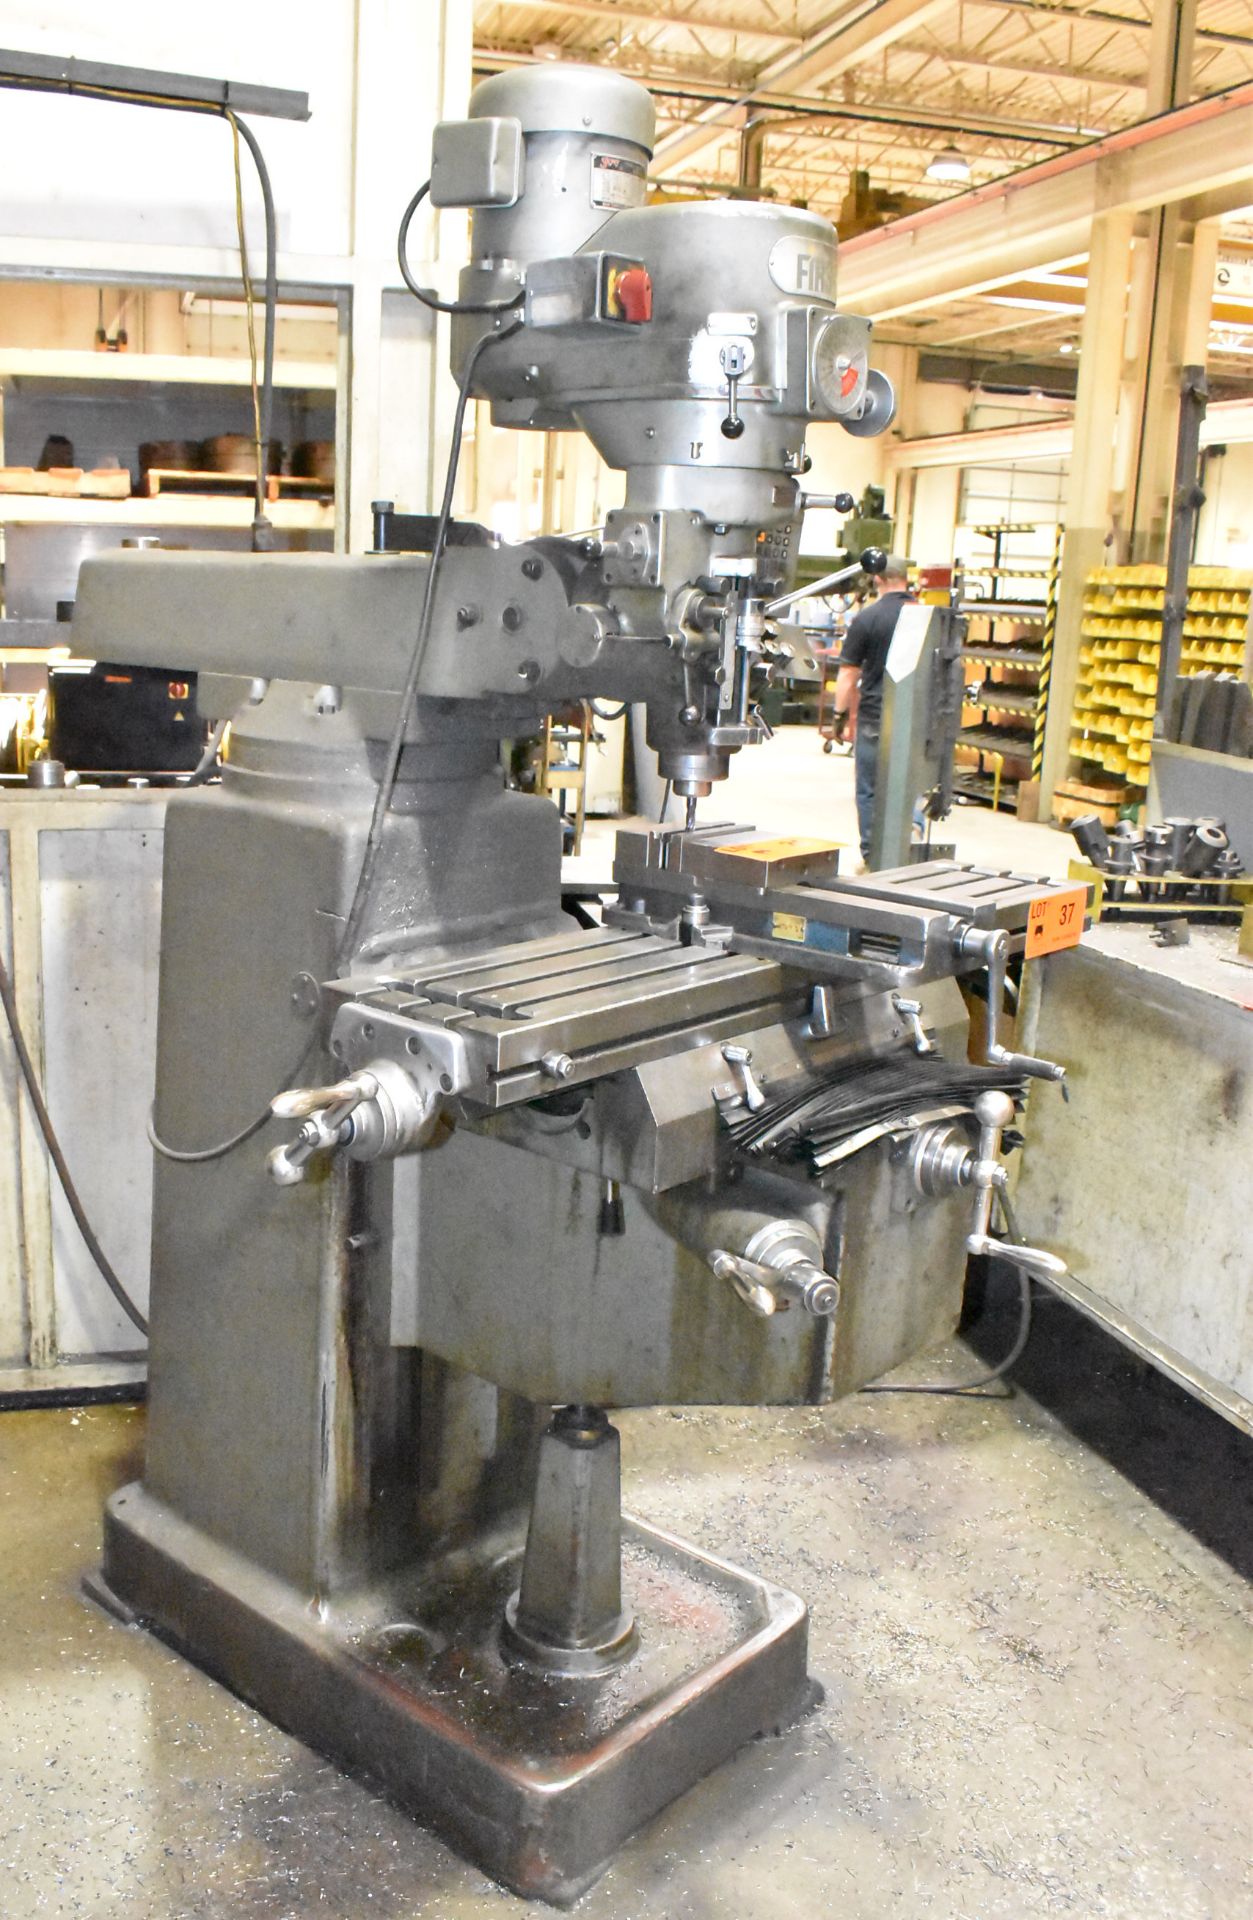 FIRST LC-185VS VERTICAL MILLING MACHINES WITH 50"X10" TABLE, SPEEDS TO 4500 RPM, HEIDENHAIN 2-AXIS - Image 8 of 8